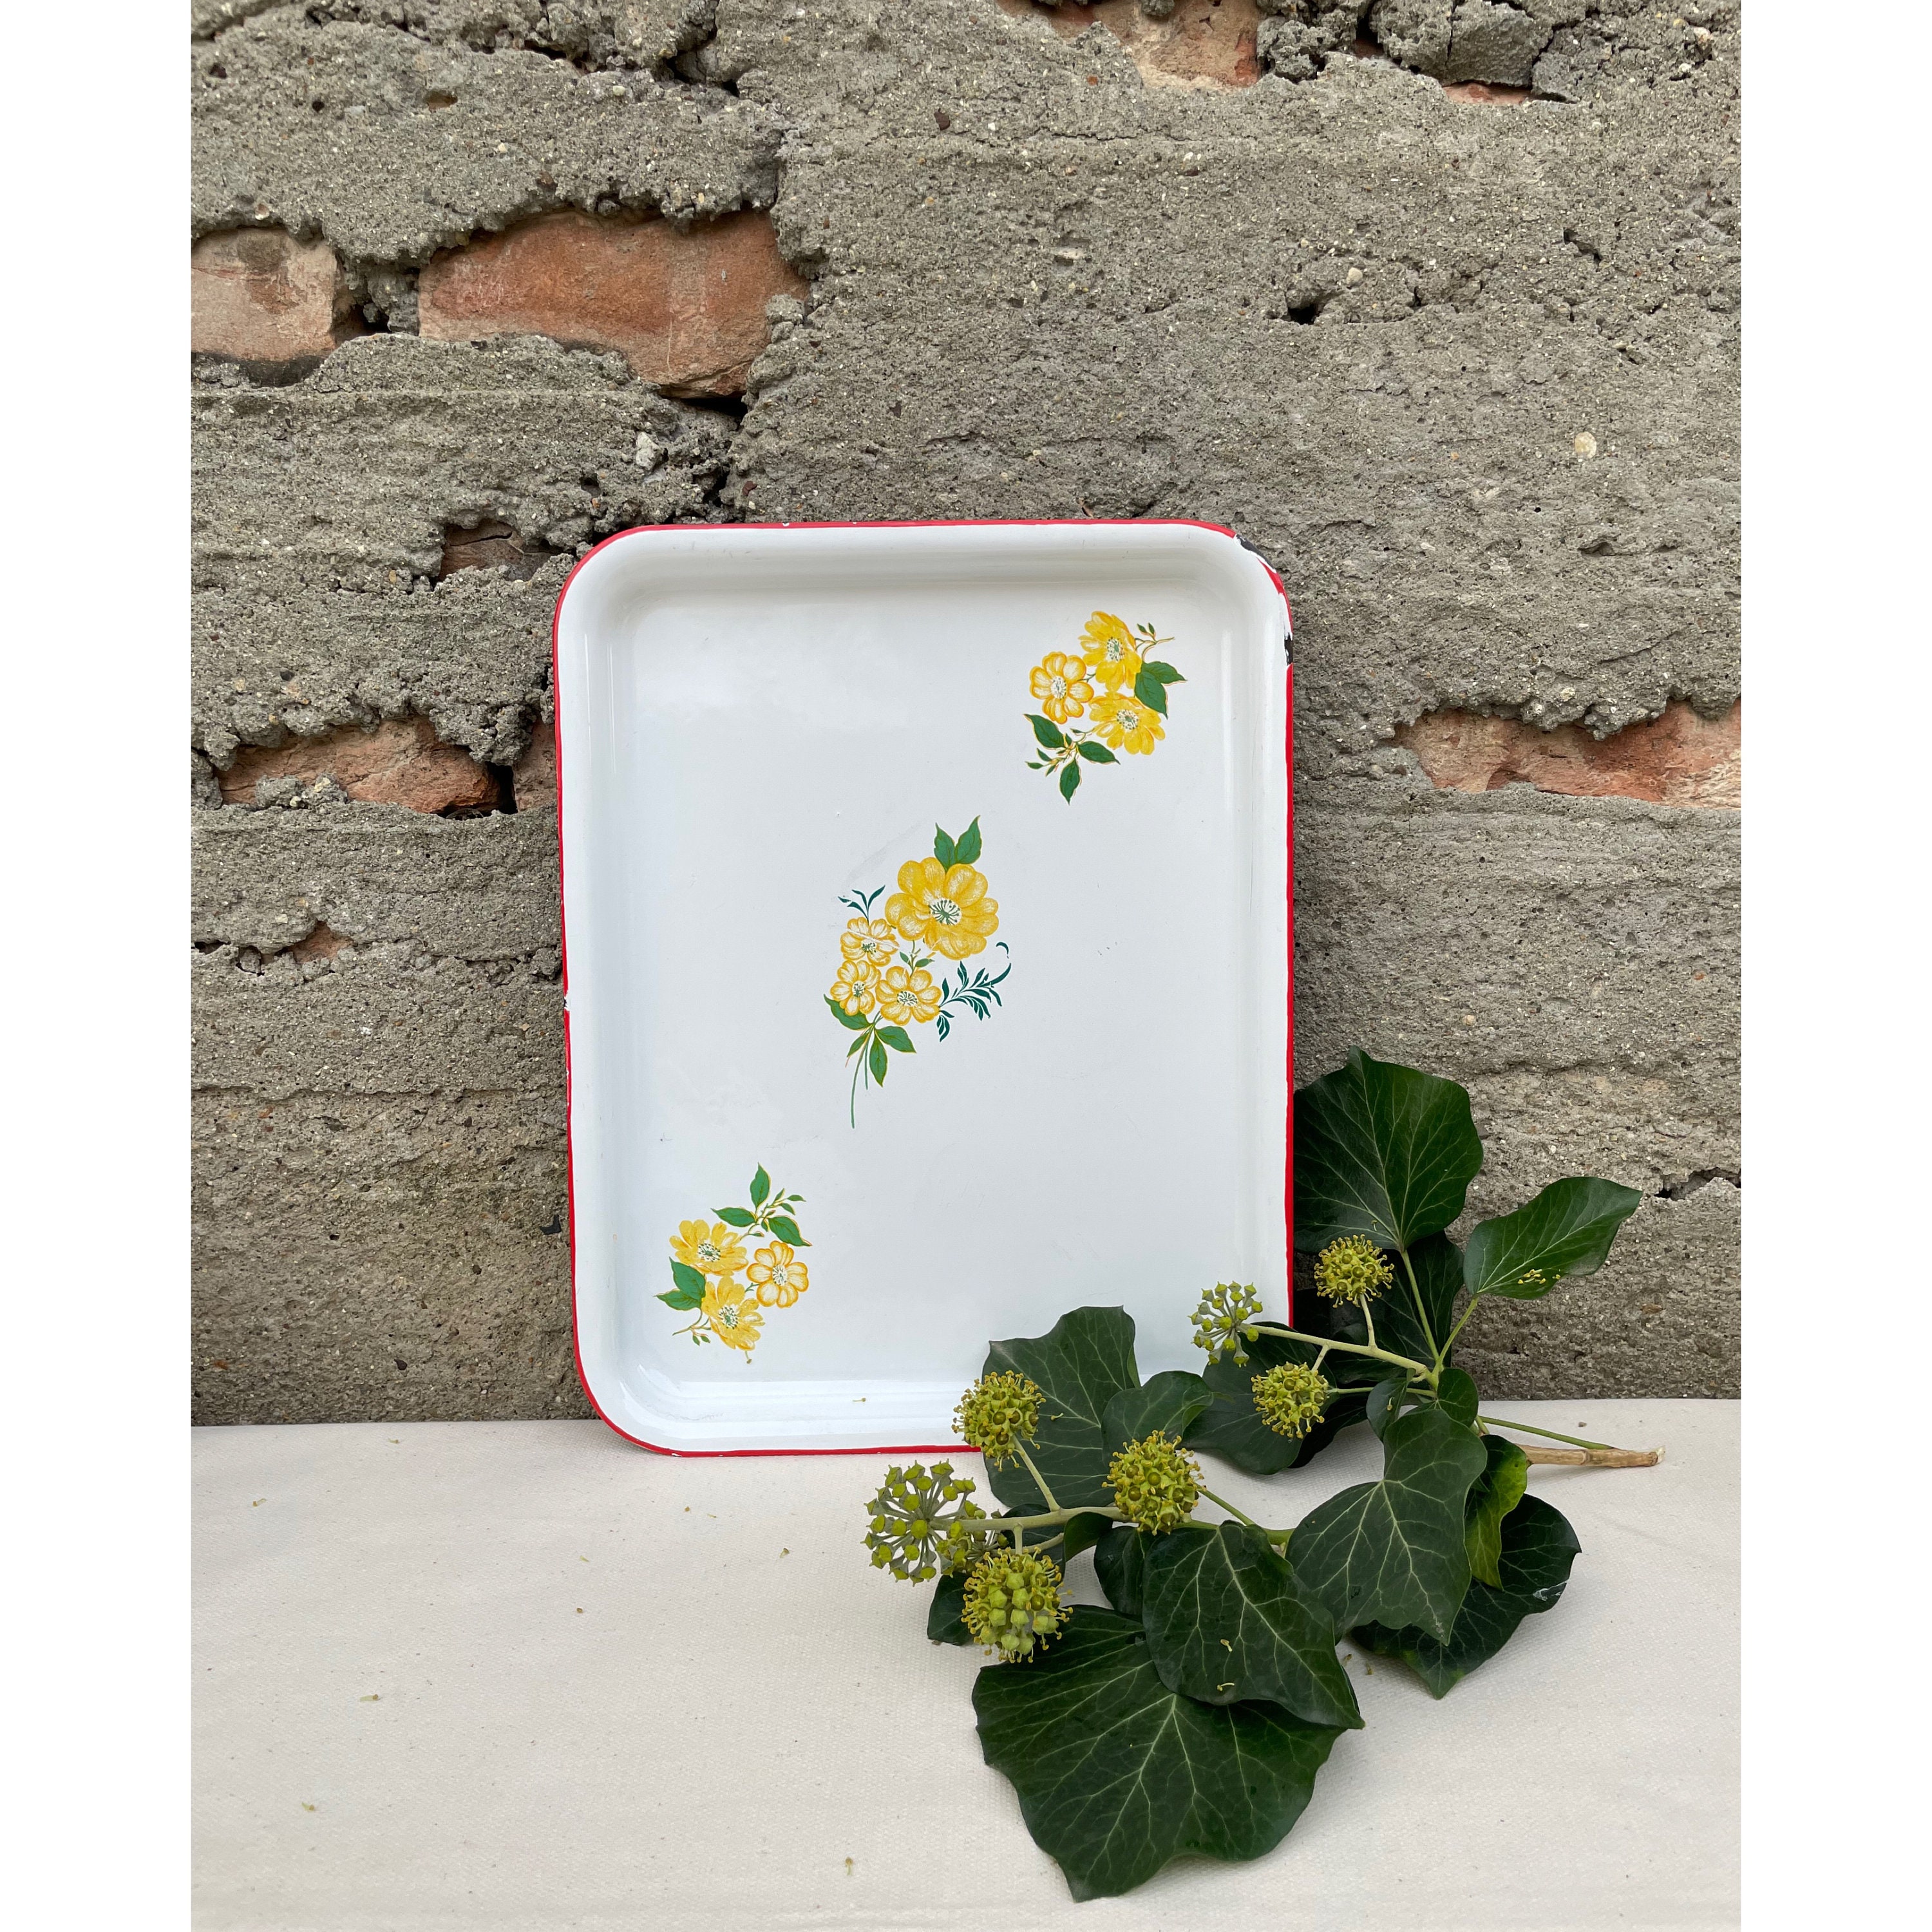 White Enamel Vintage Food Serving Tray Rustic Dish Country Kitchen Dec